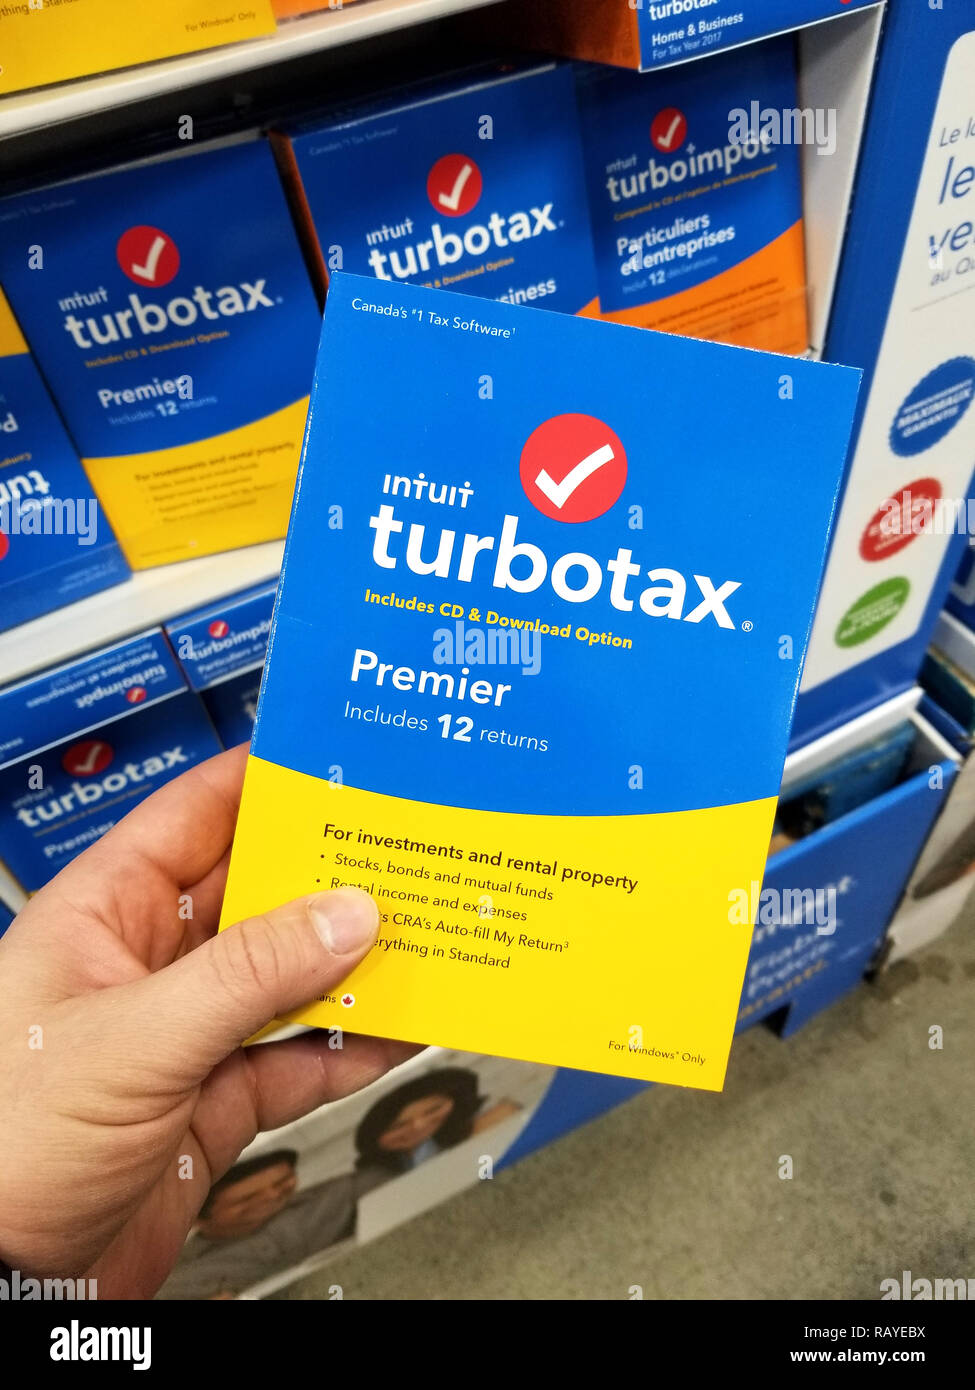 intuit turbotax 2017 home and business